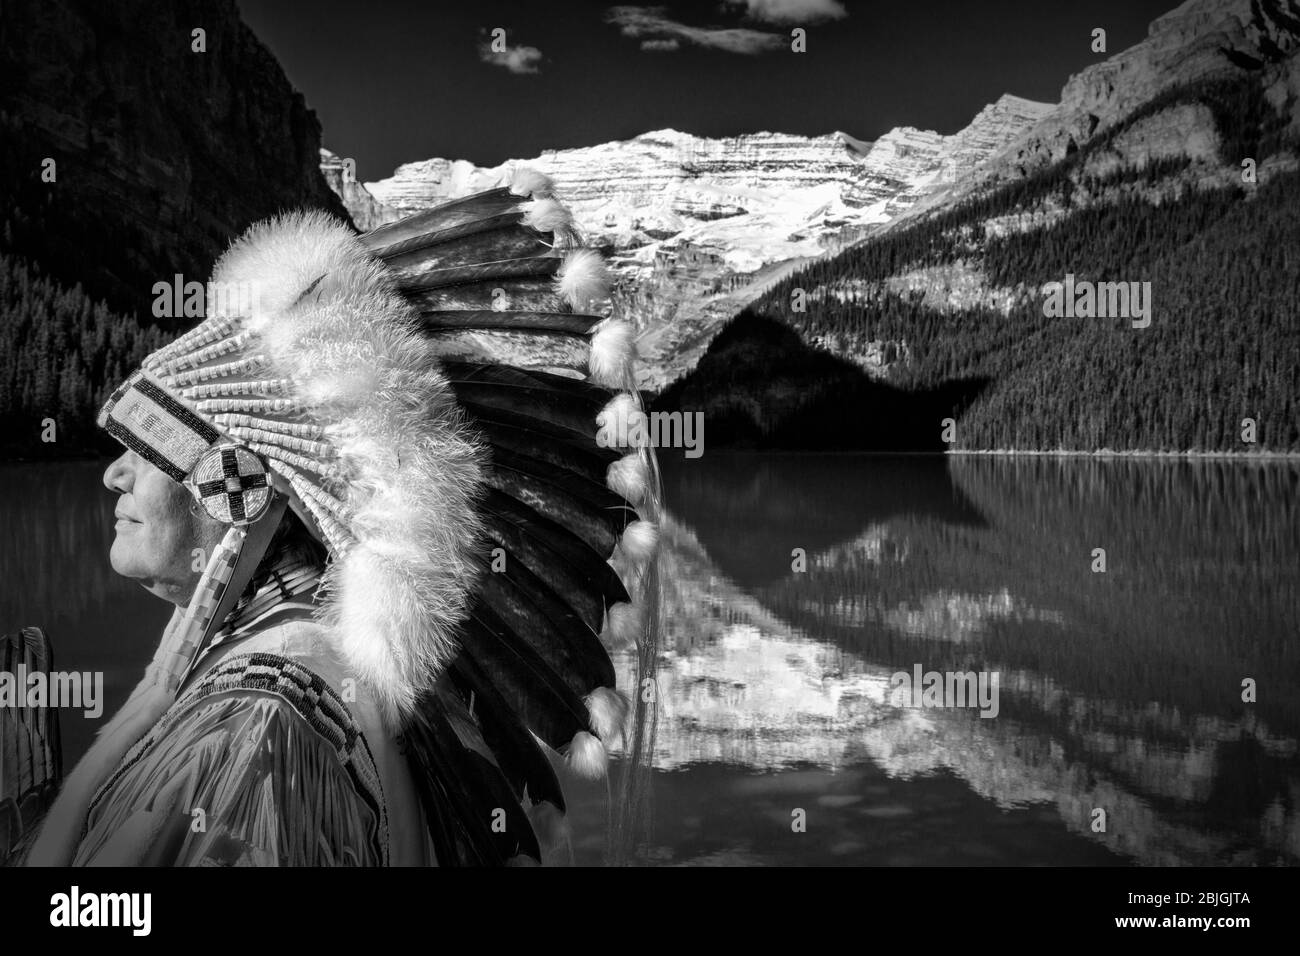 B&W of Cree Chief  (model released) of First Nations at Lake Louise, Banff National Park, Albert Canada. Stock Photo